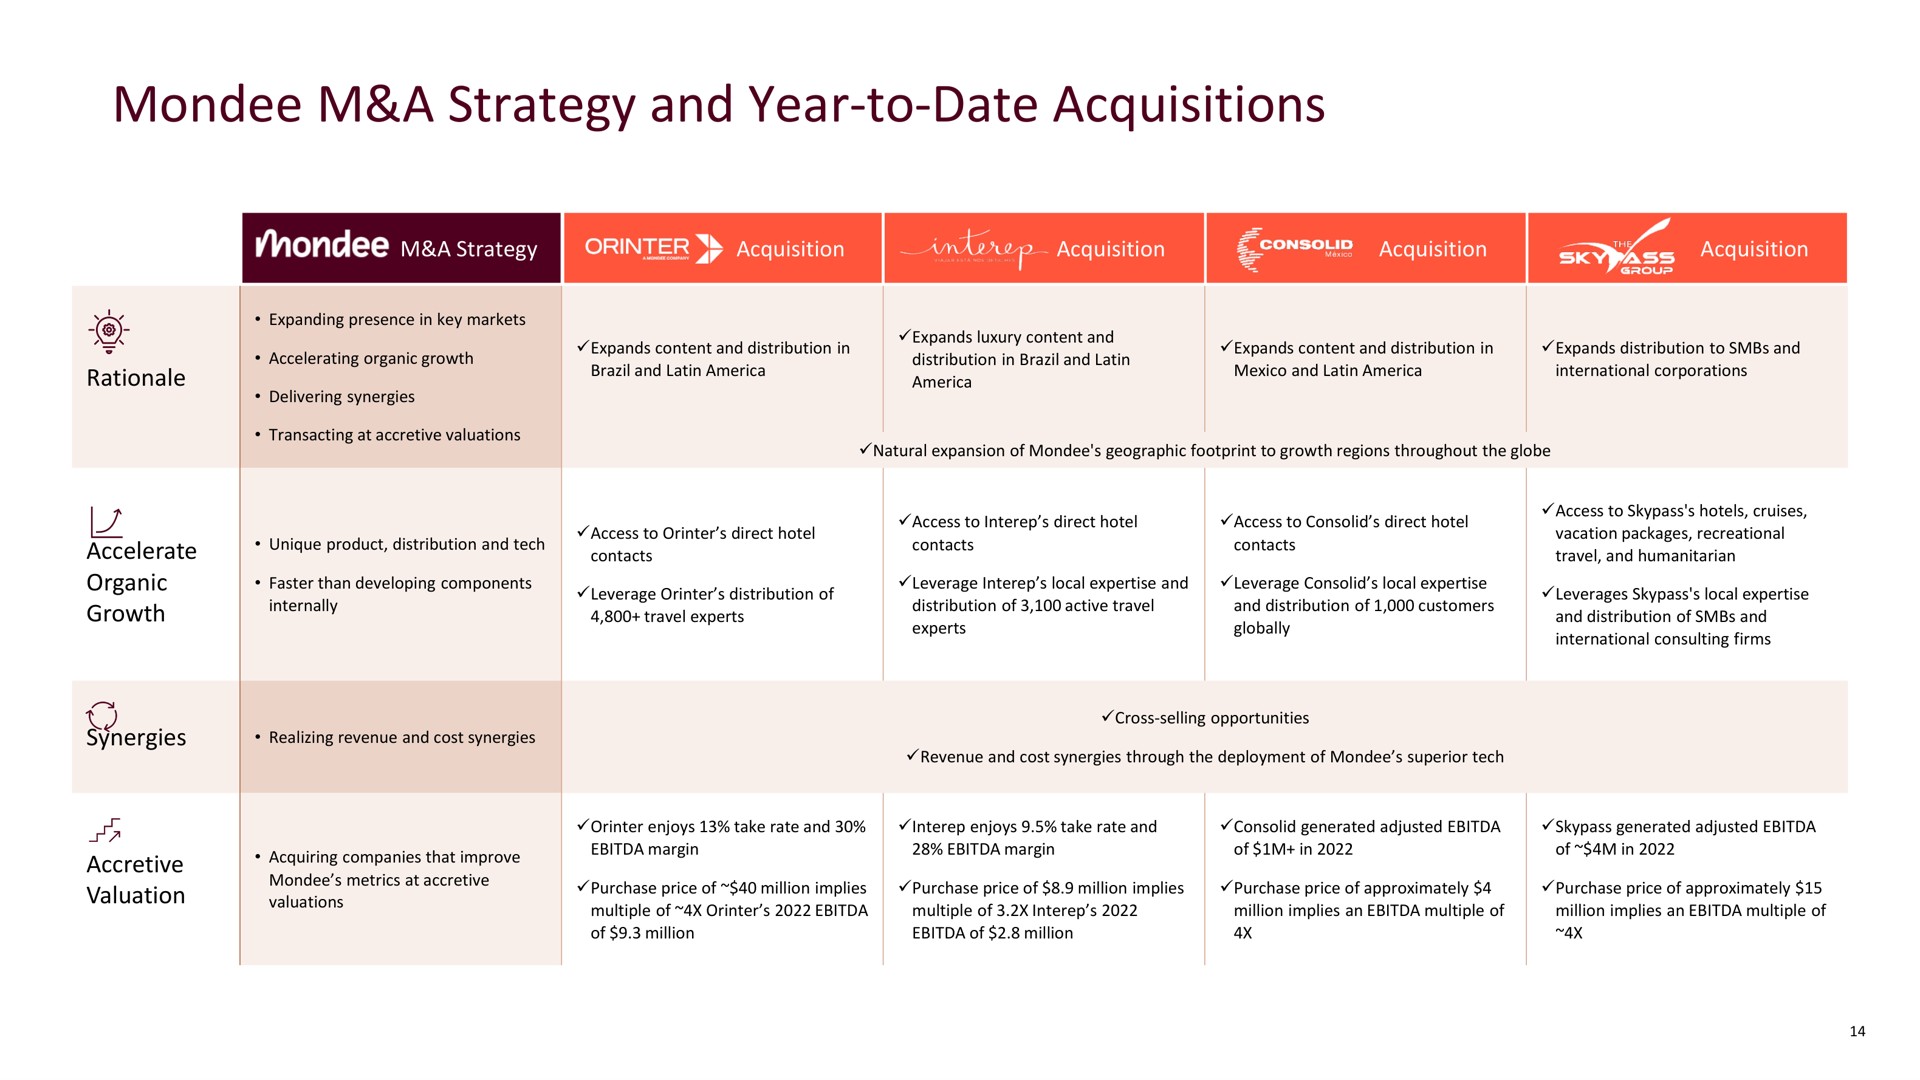 a strategy and year to date acquisitions | Mondee